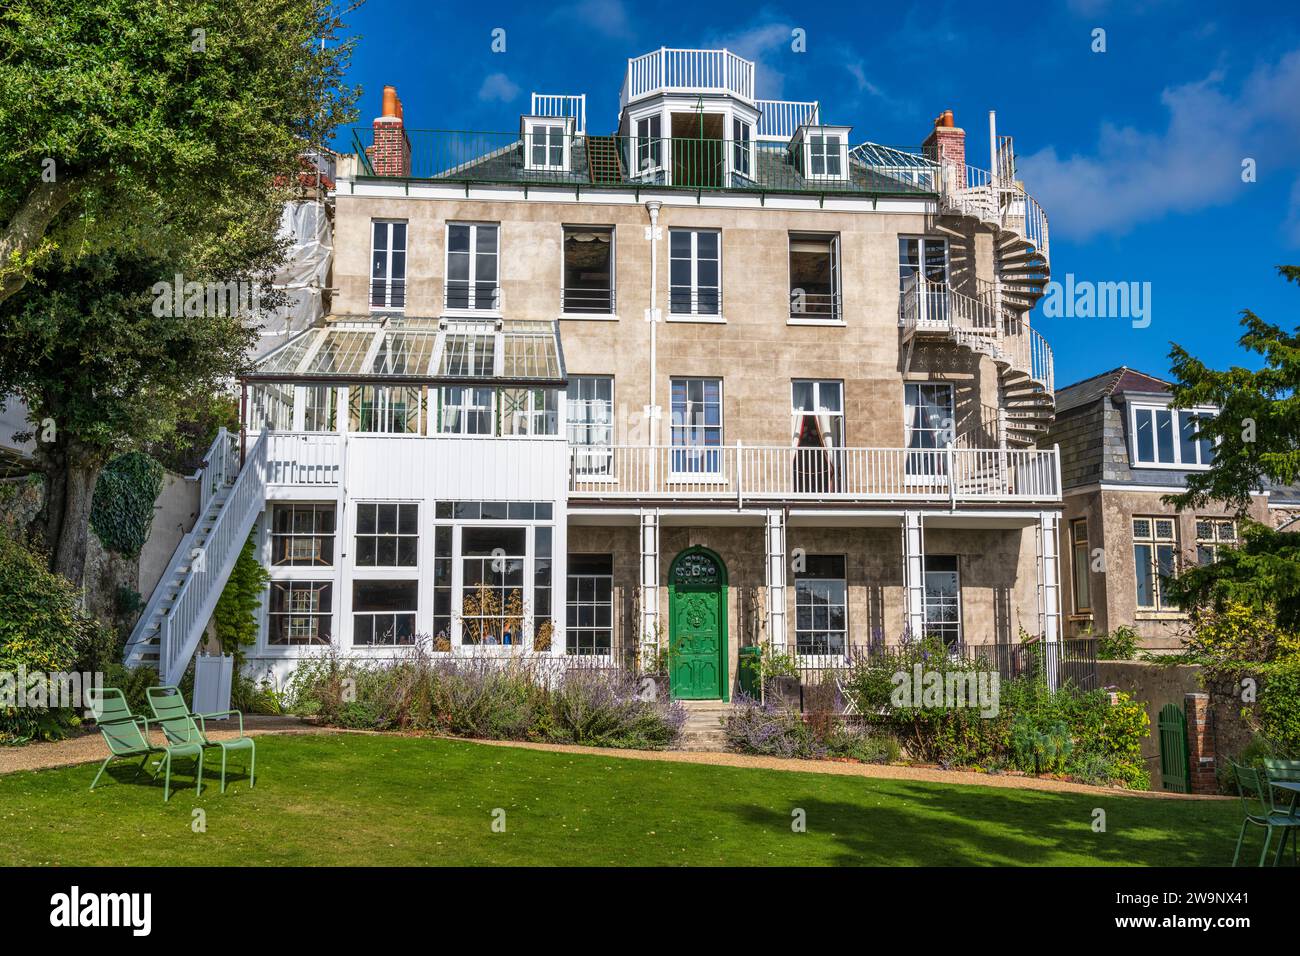 Hauteville House, home of Victor Hugo, viewed from the garden in St Peter Port, Guernsey, Channel Islands Stock Photo